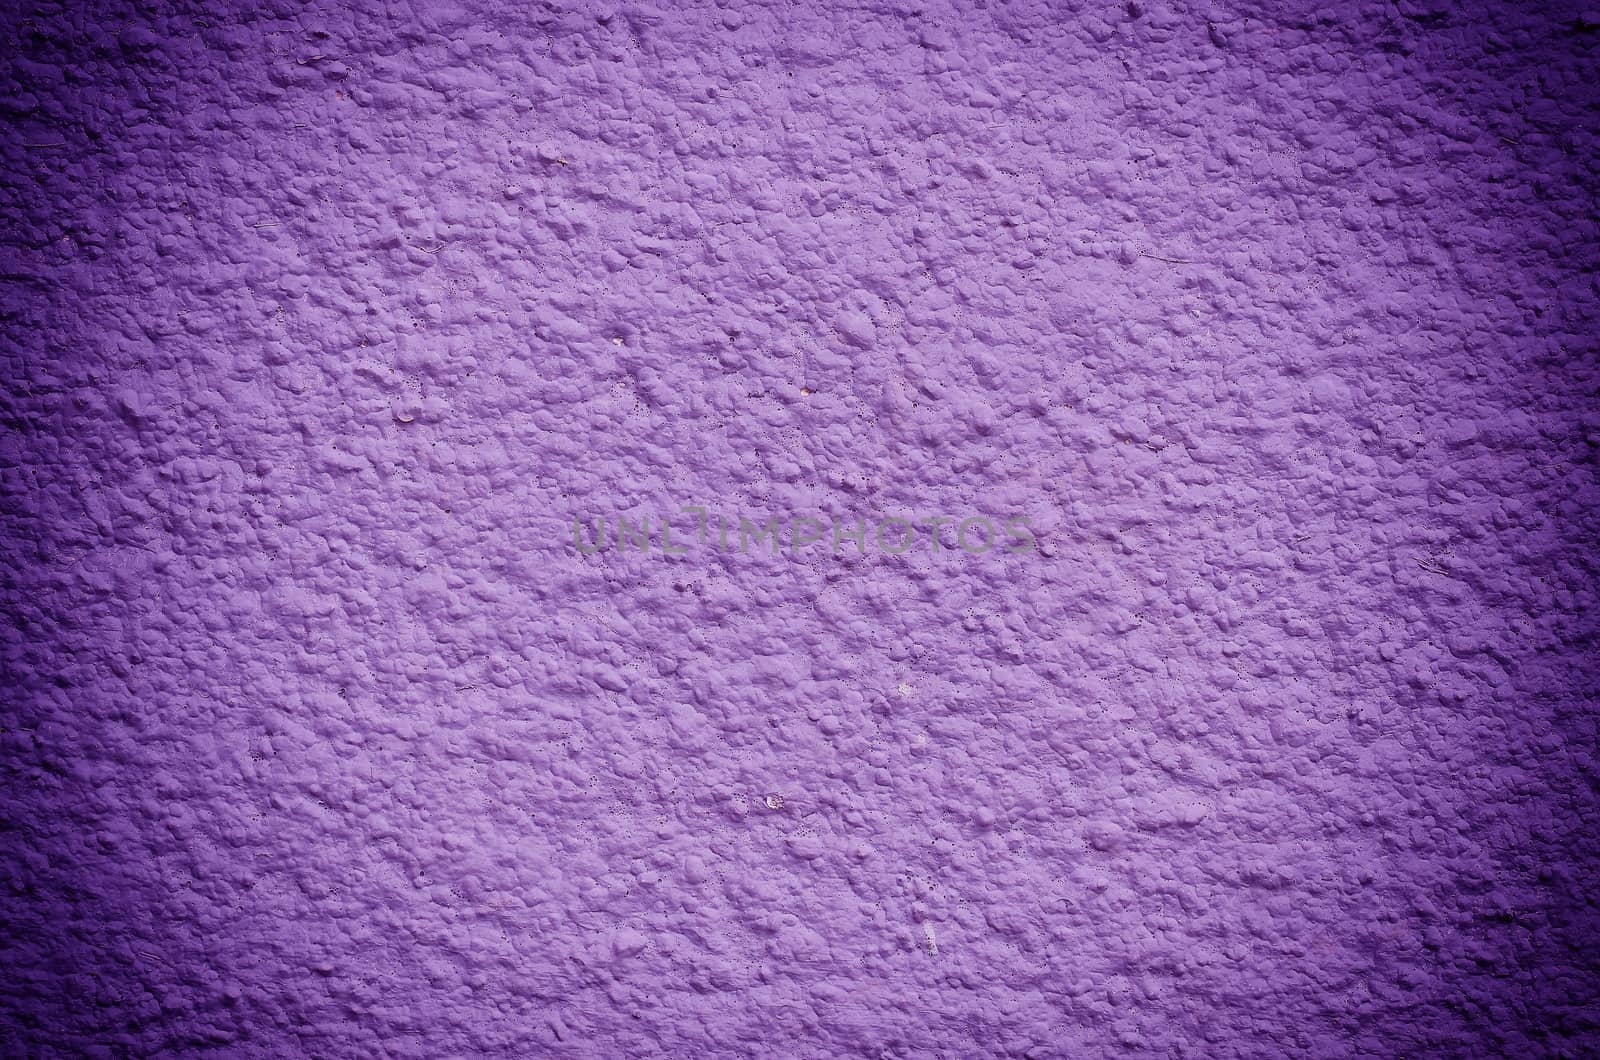 violet cement wall background in vintage light